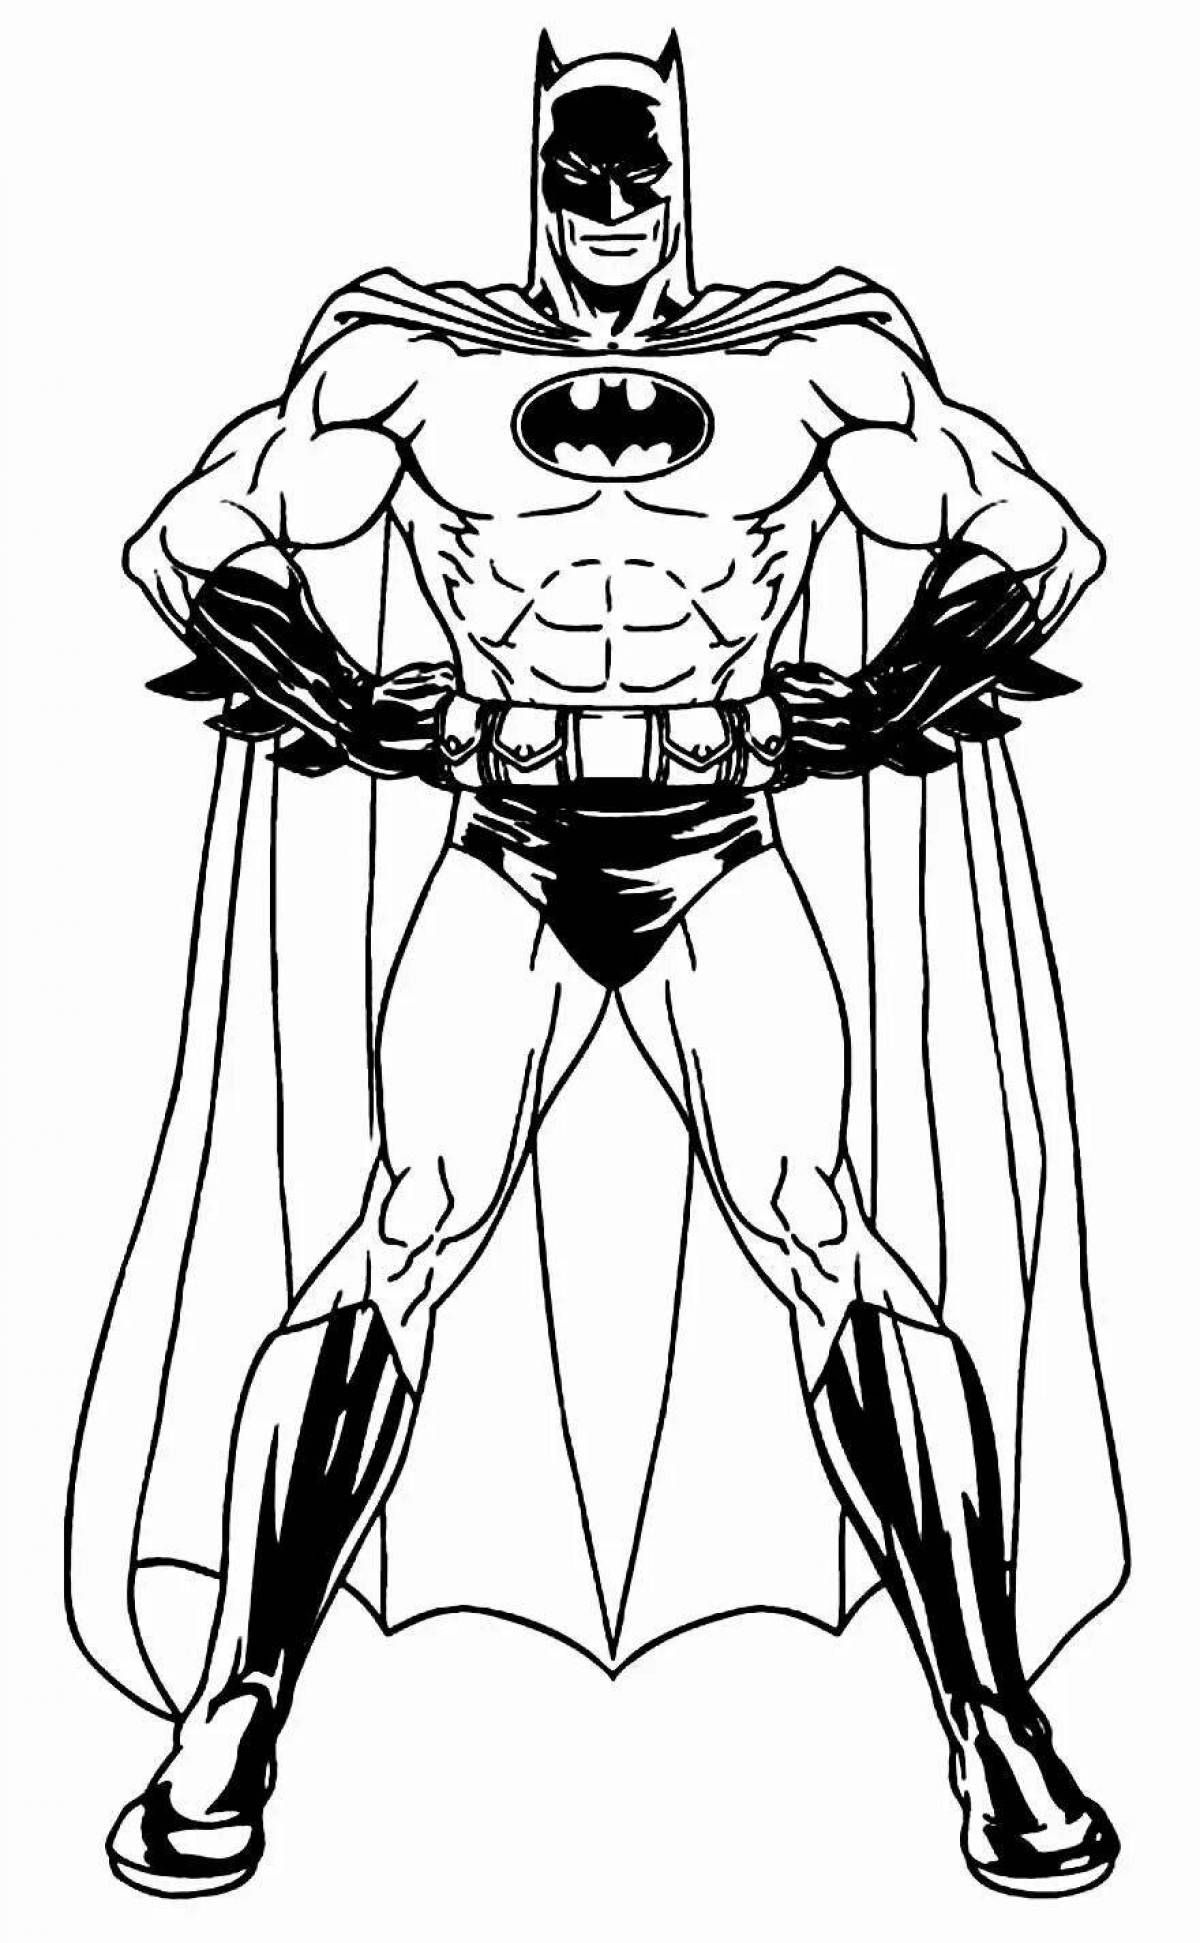 Batman for kids 3 4 years old #8